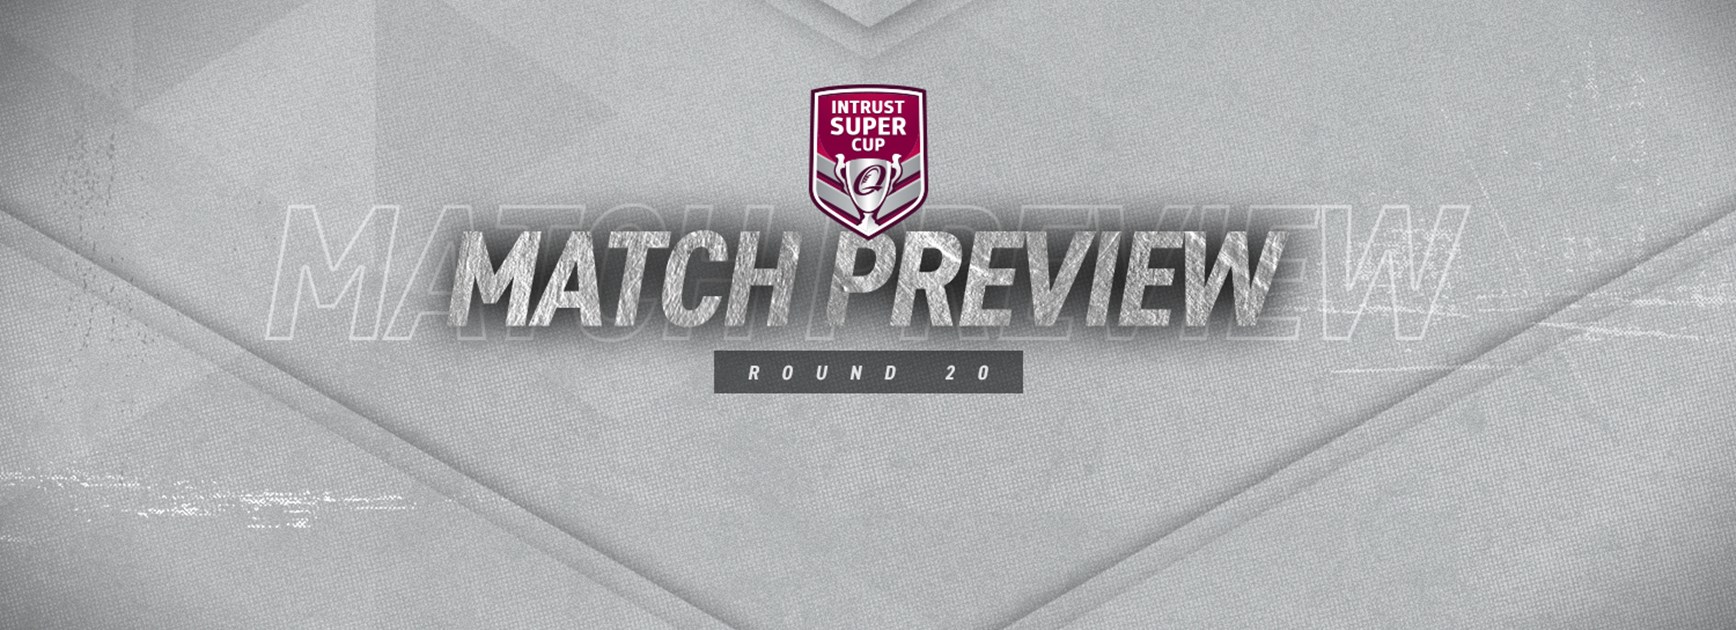 Intrust Super Cup Round 20 preview